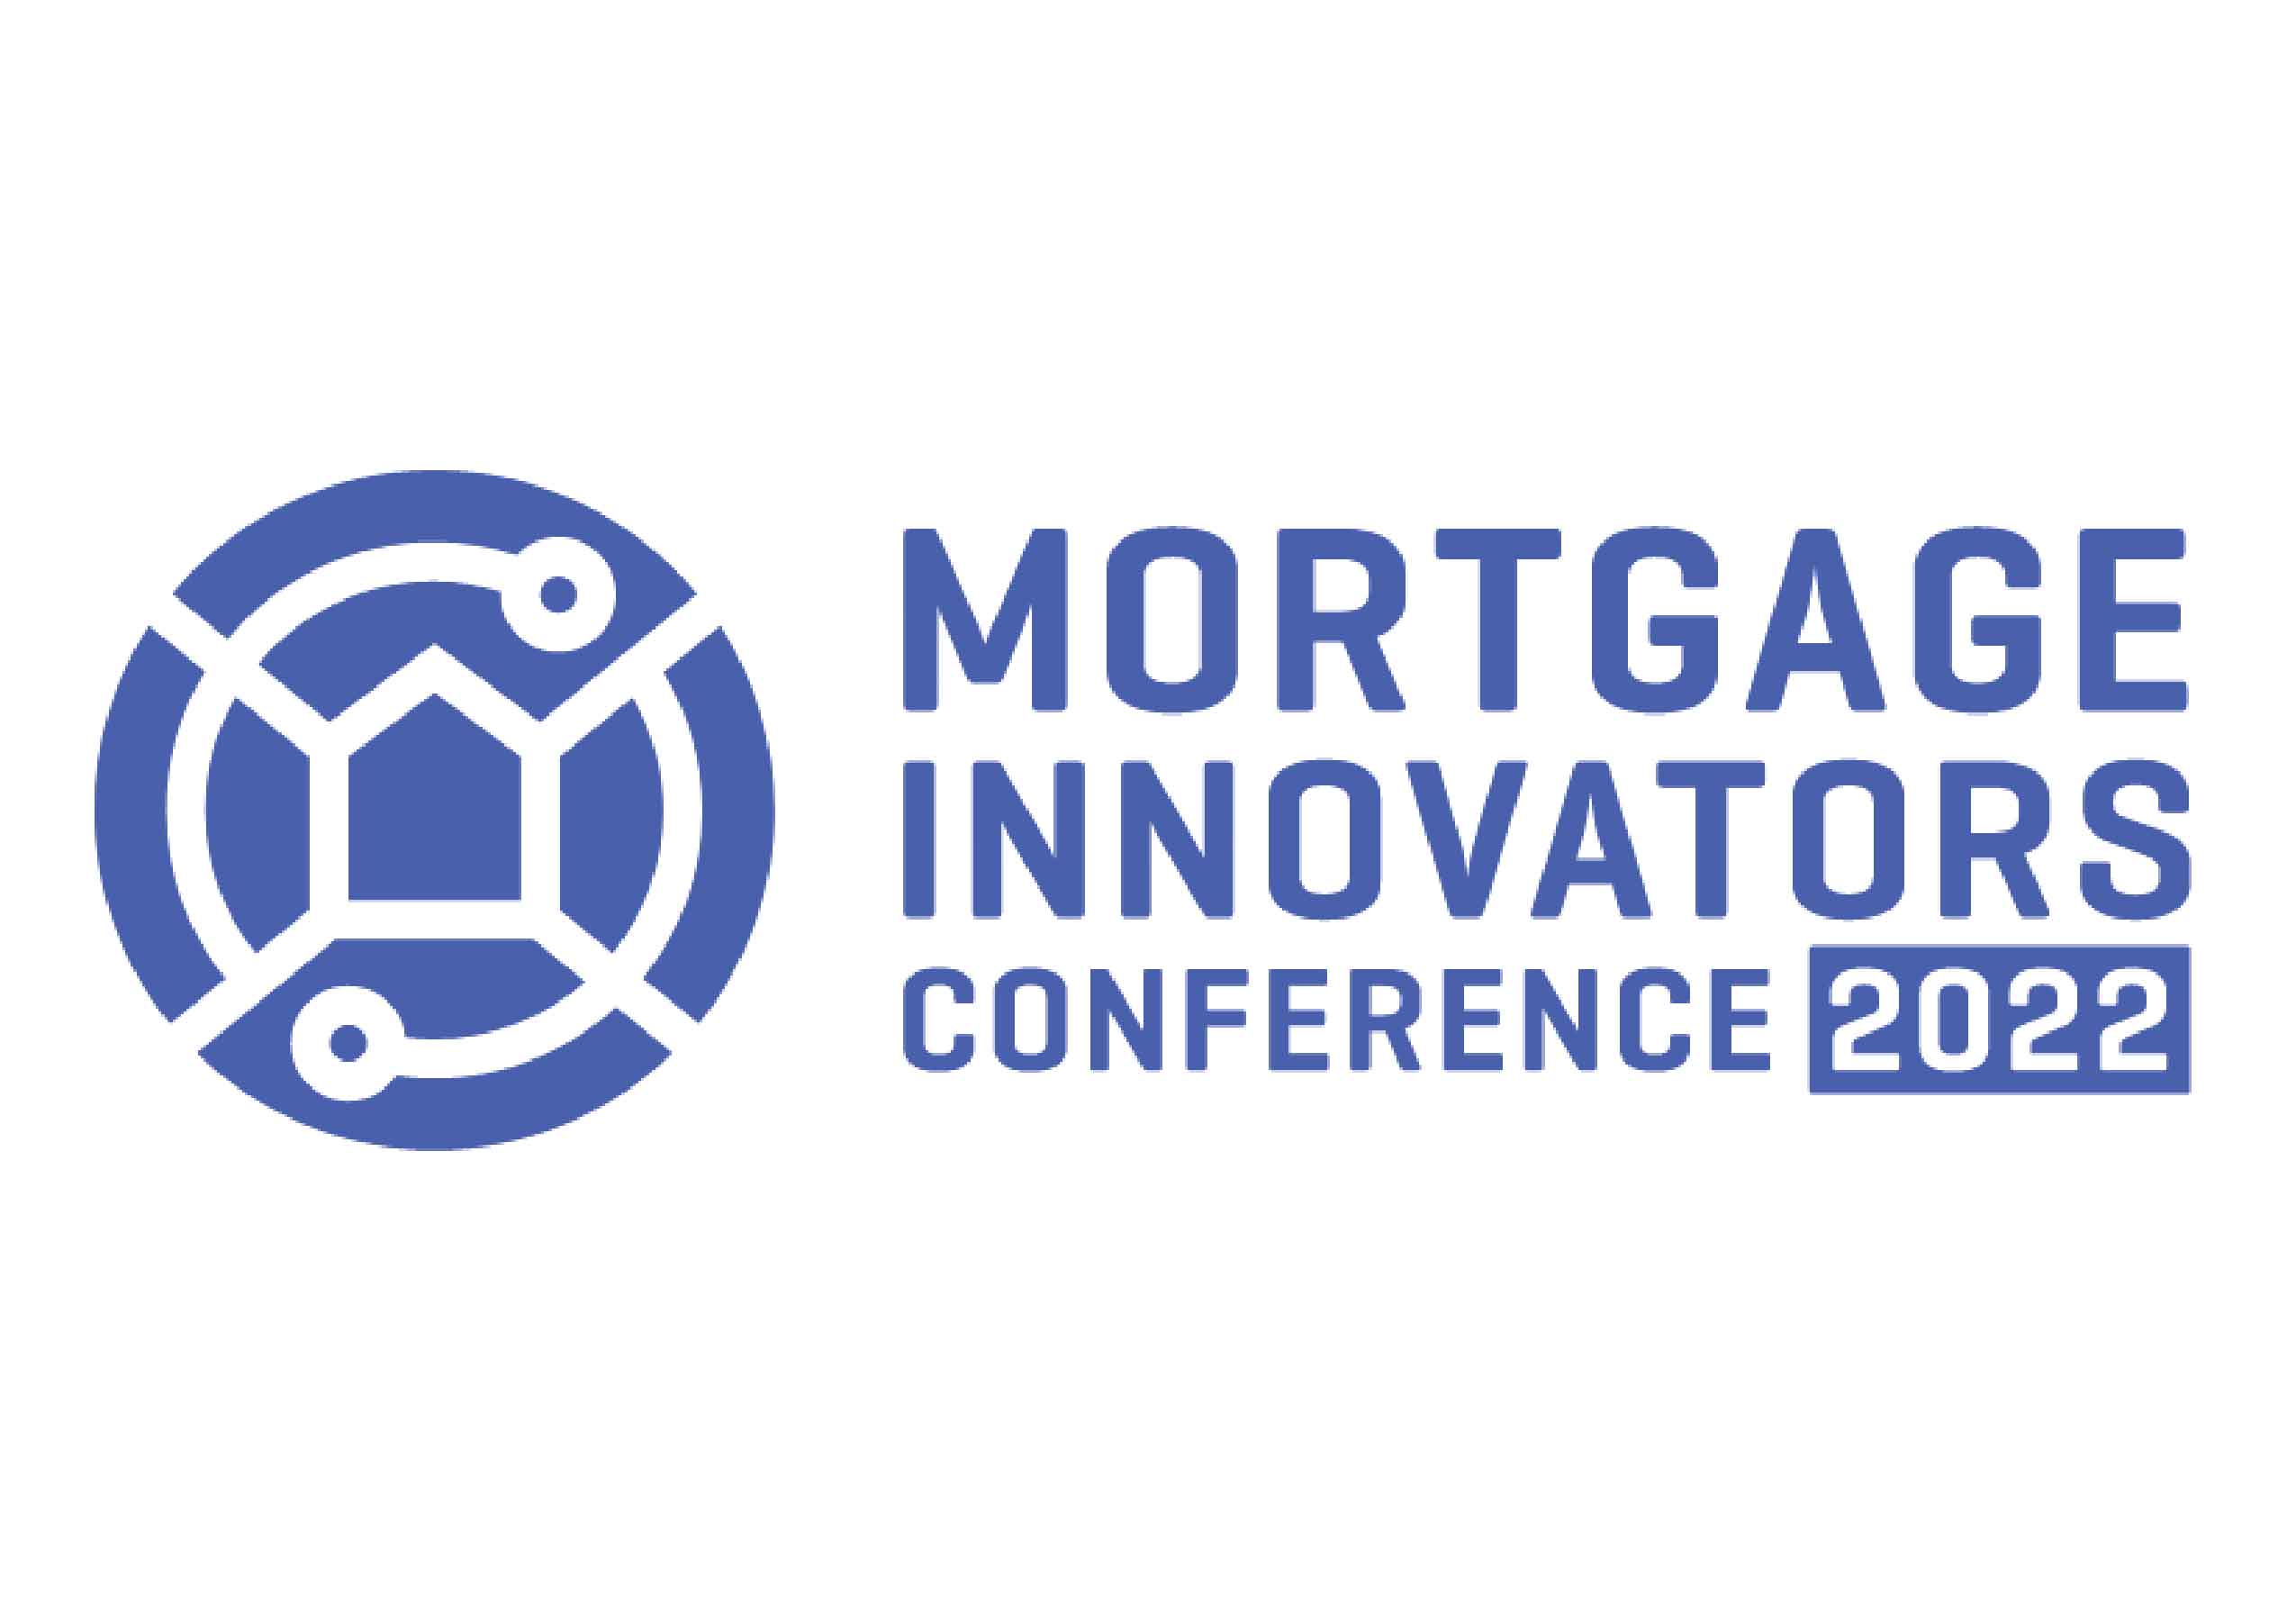 CMBA Mortgage Innovators Conference